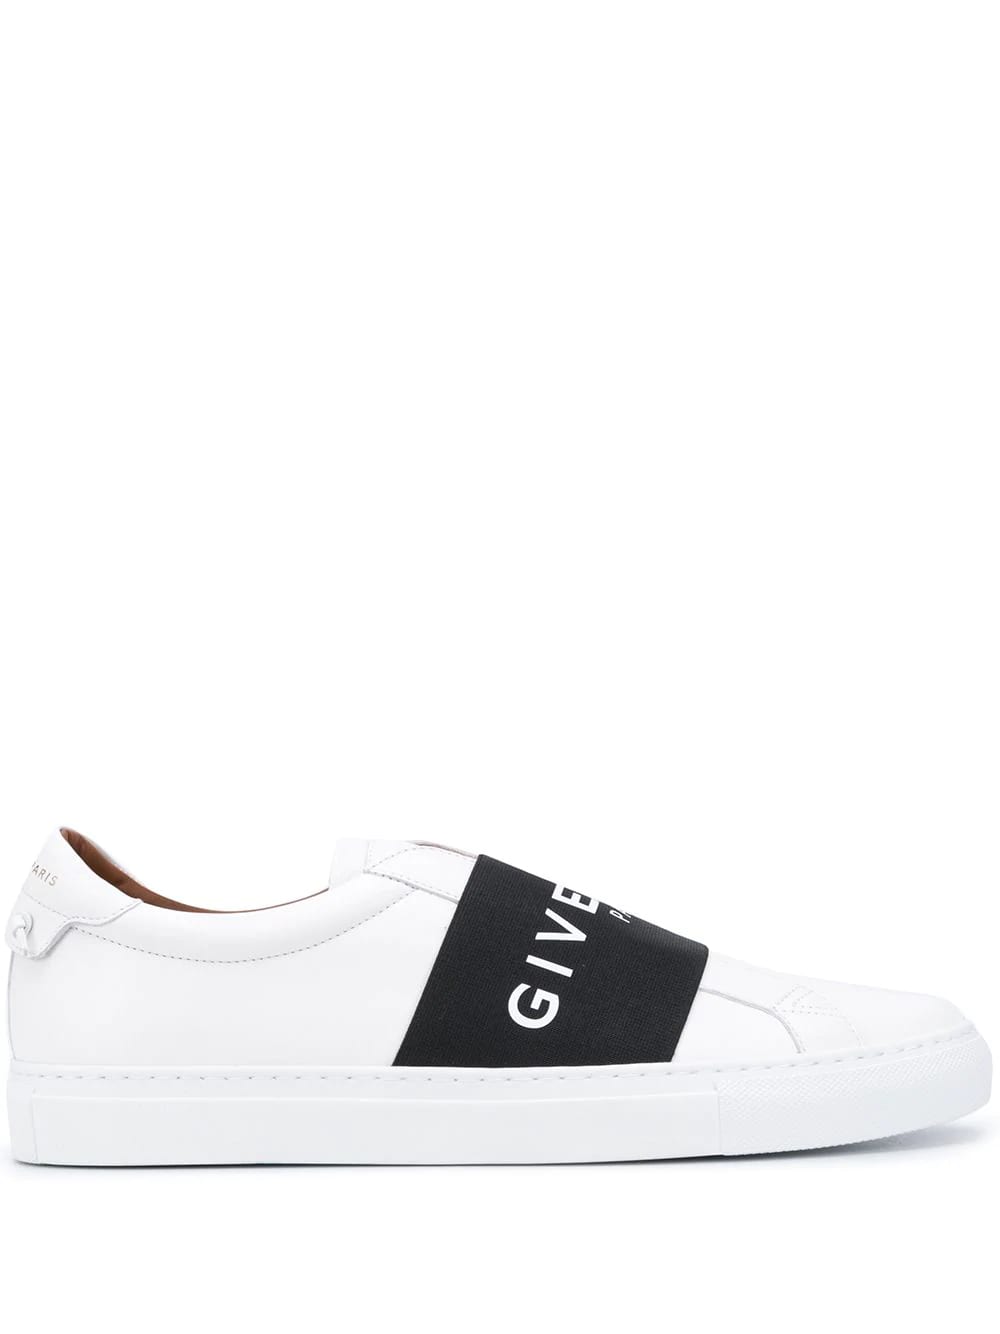 Givenchy Man White And Black Urban Street Sneakers With Band